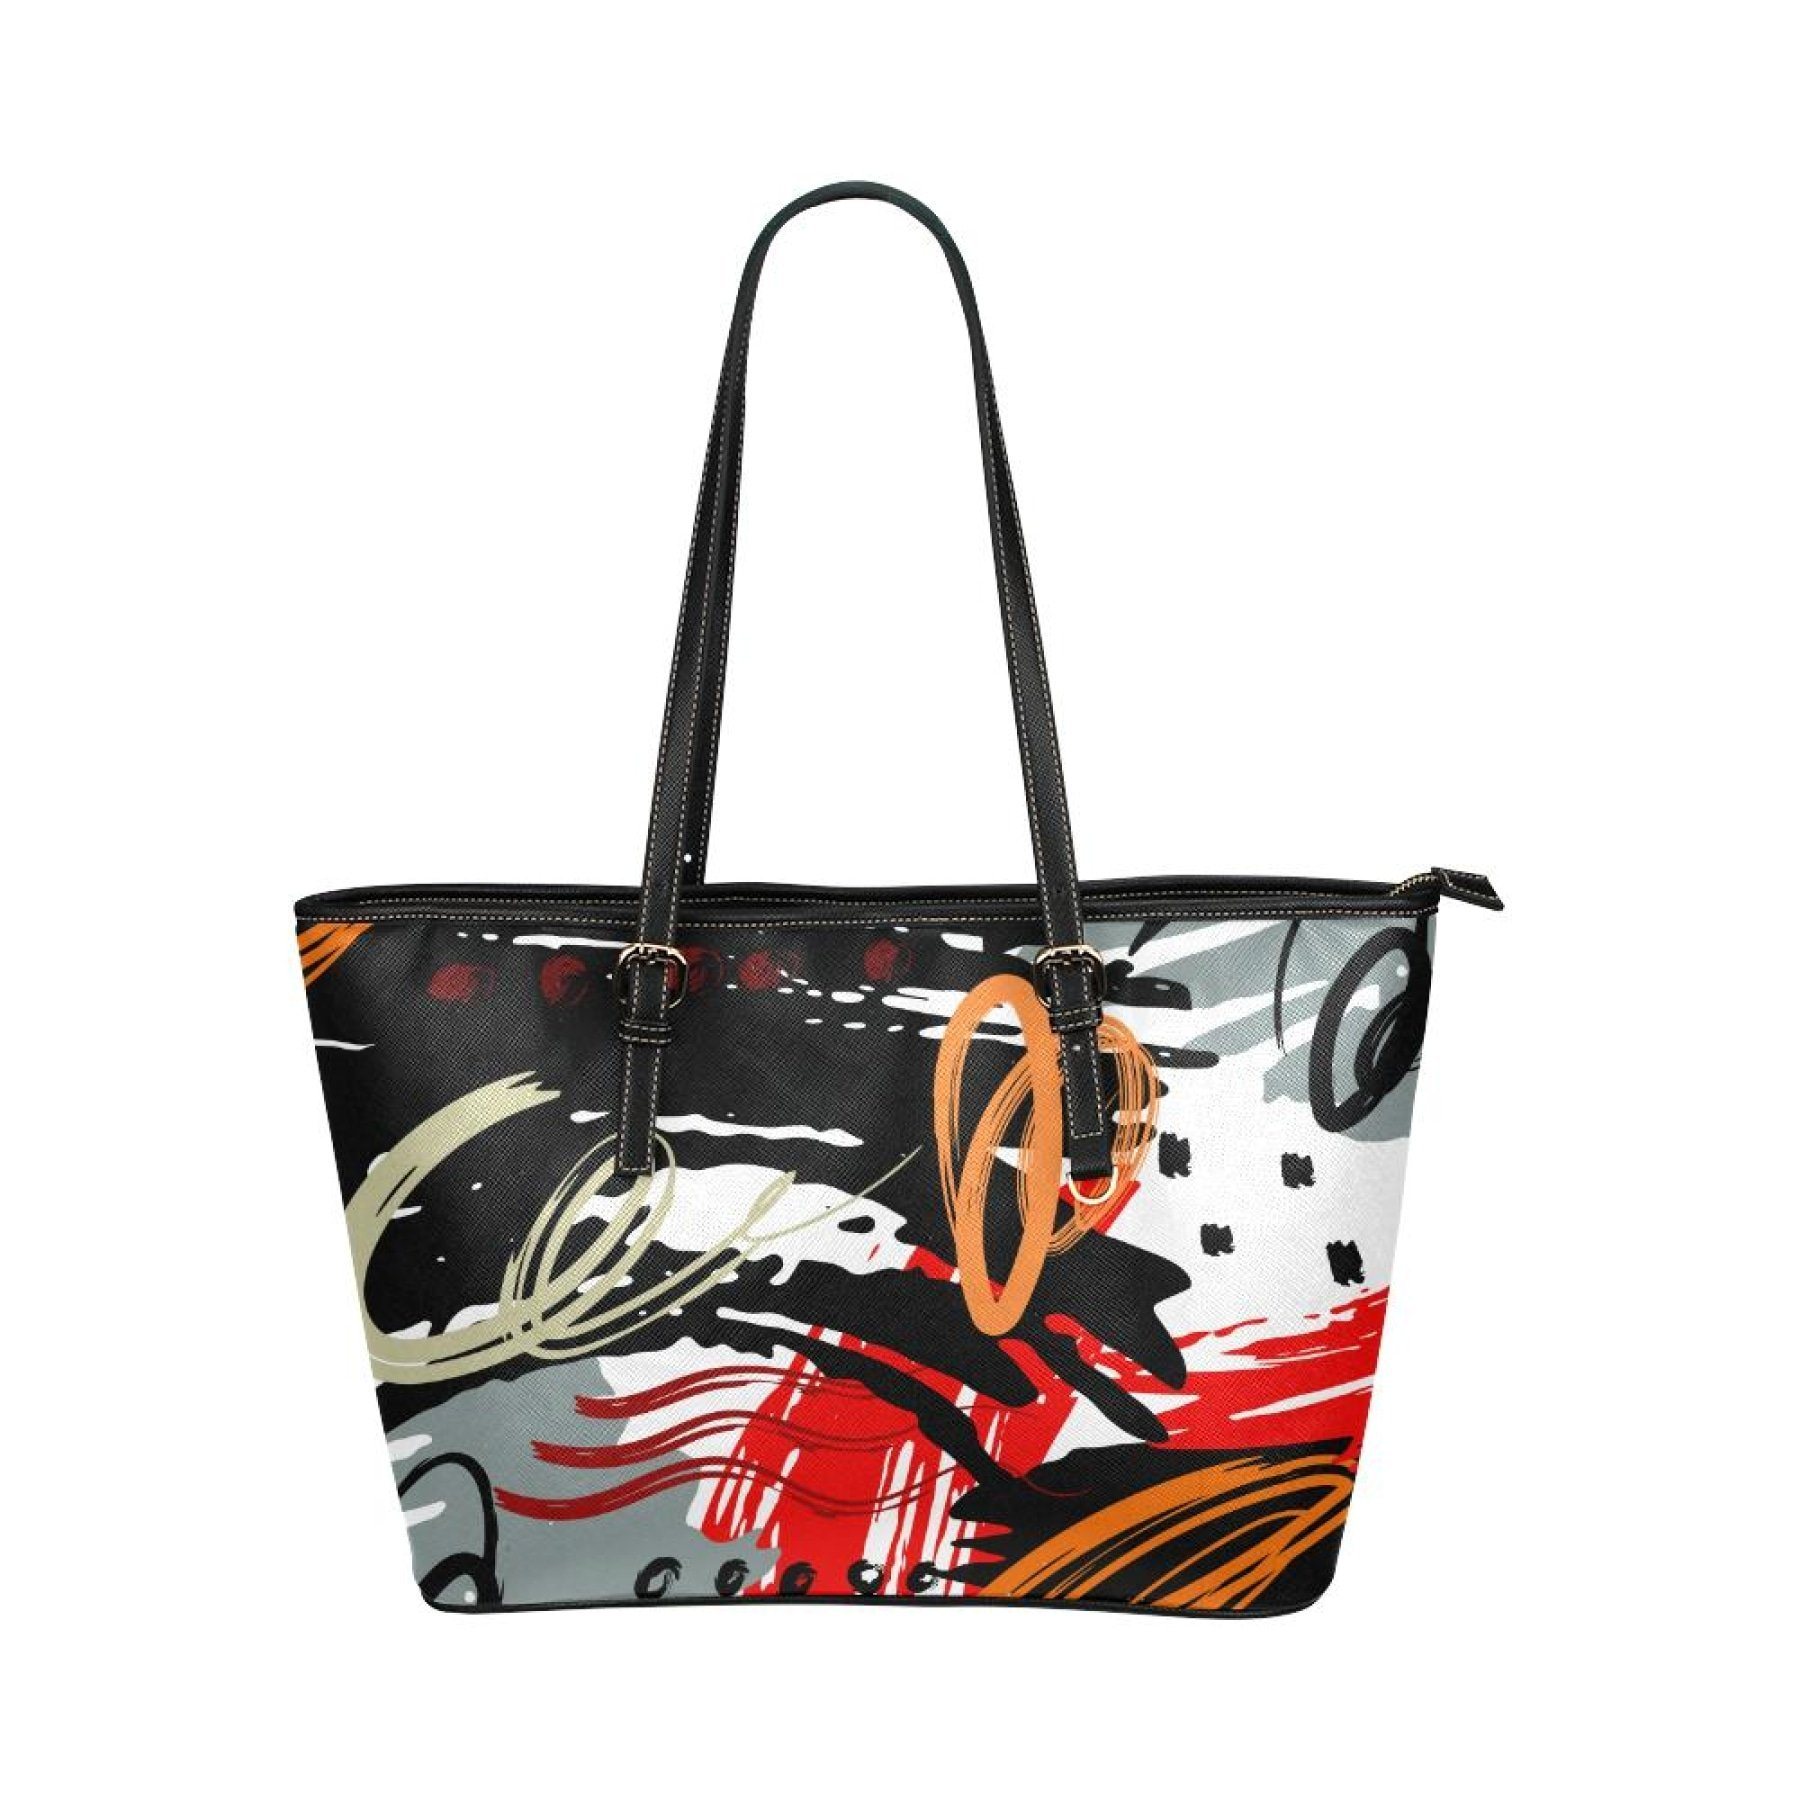 Black, Red, And Gray Abstract Style Leather Tote Bag 9